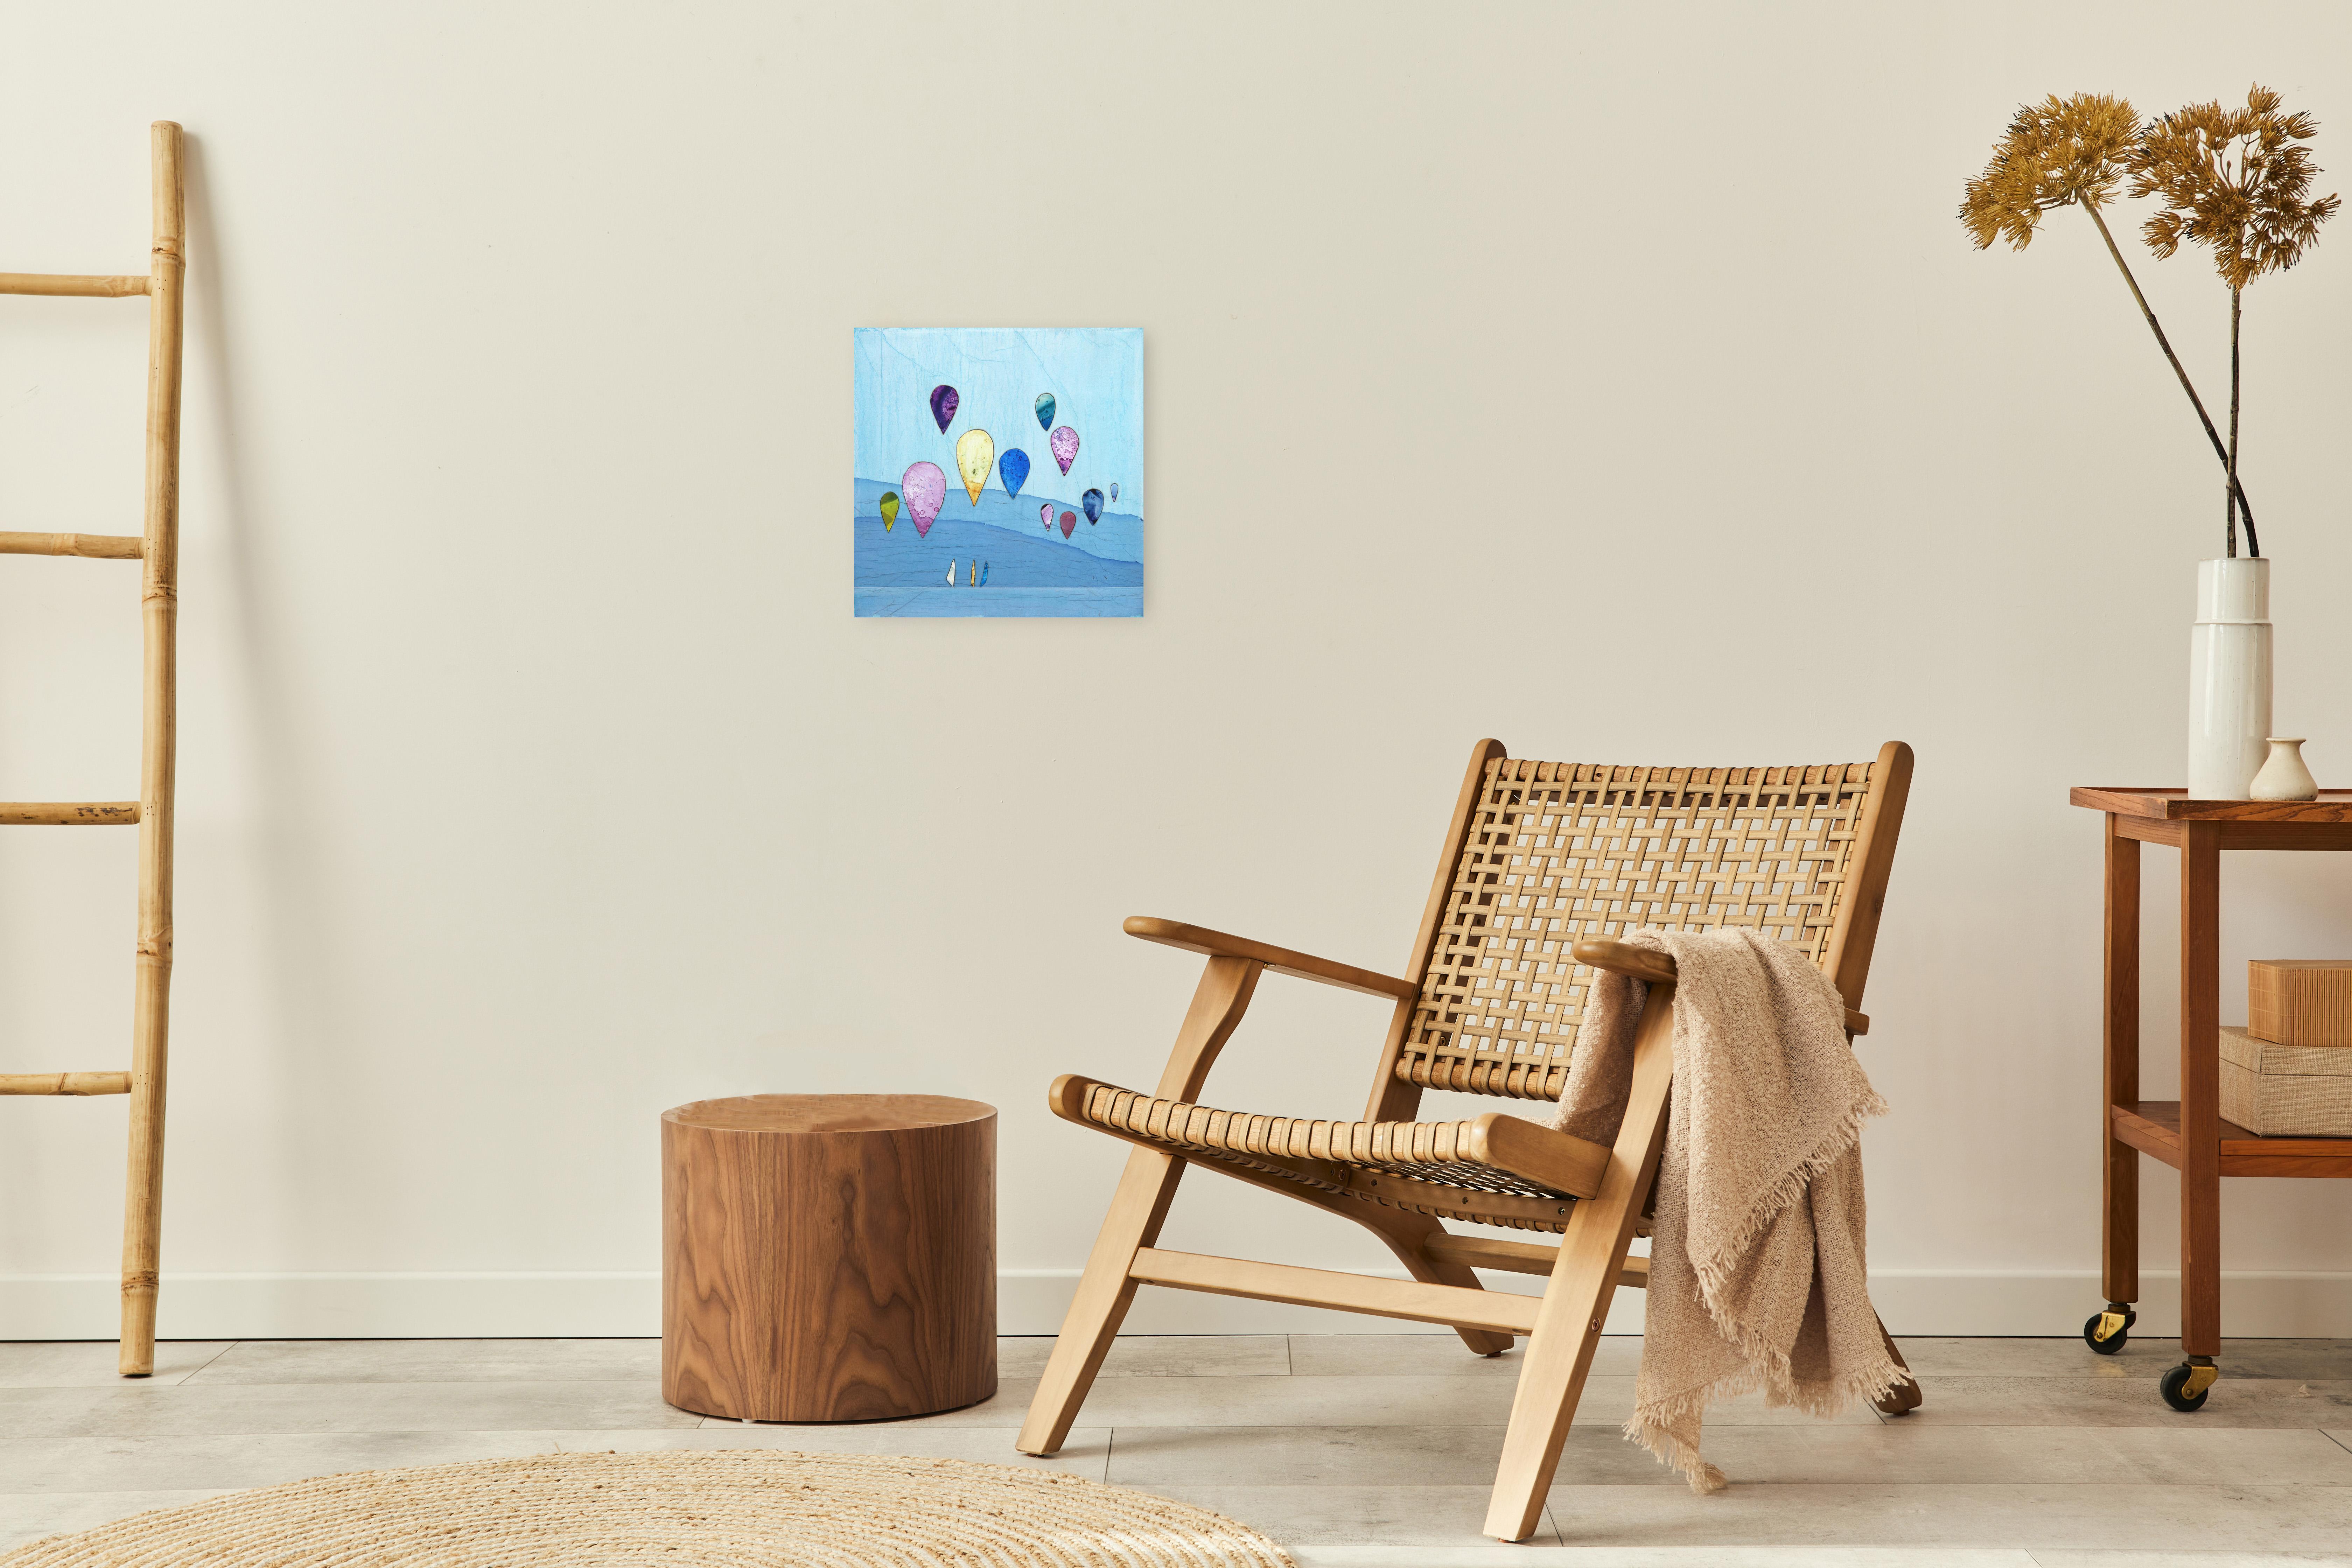 Our Hangout I - Original Boho Minimalist Abstract Landscape Balloon Artwork - Painting by Peter Kuttner